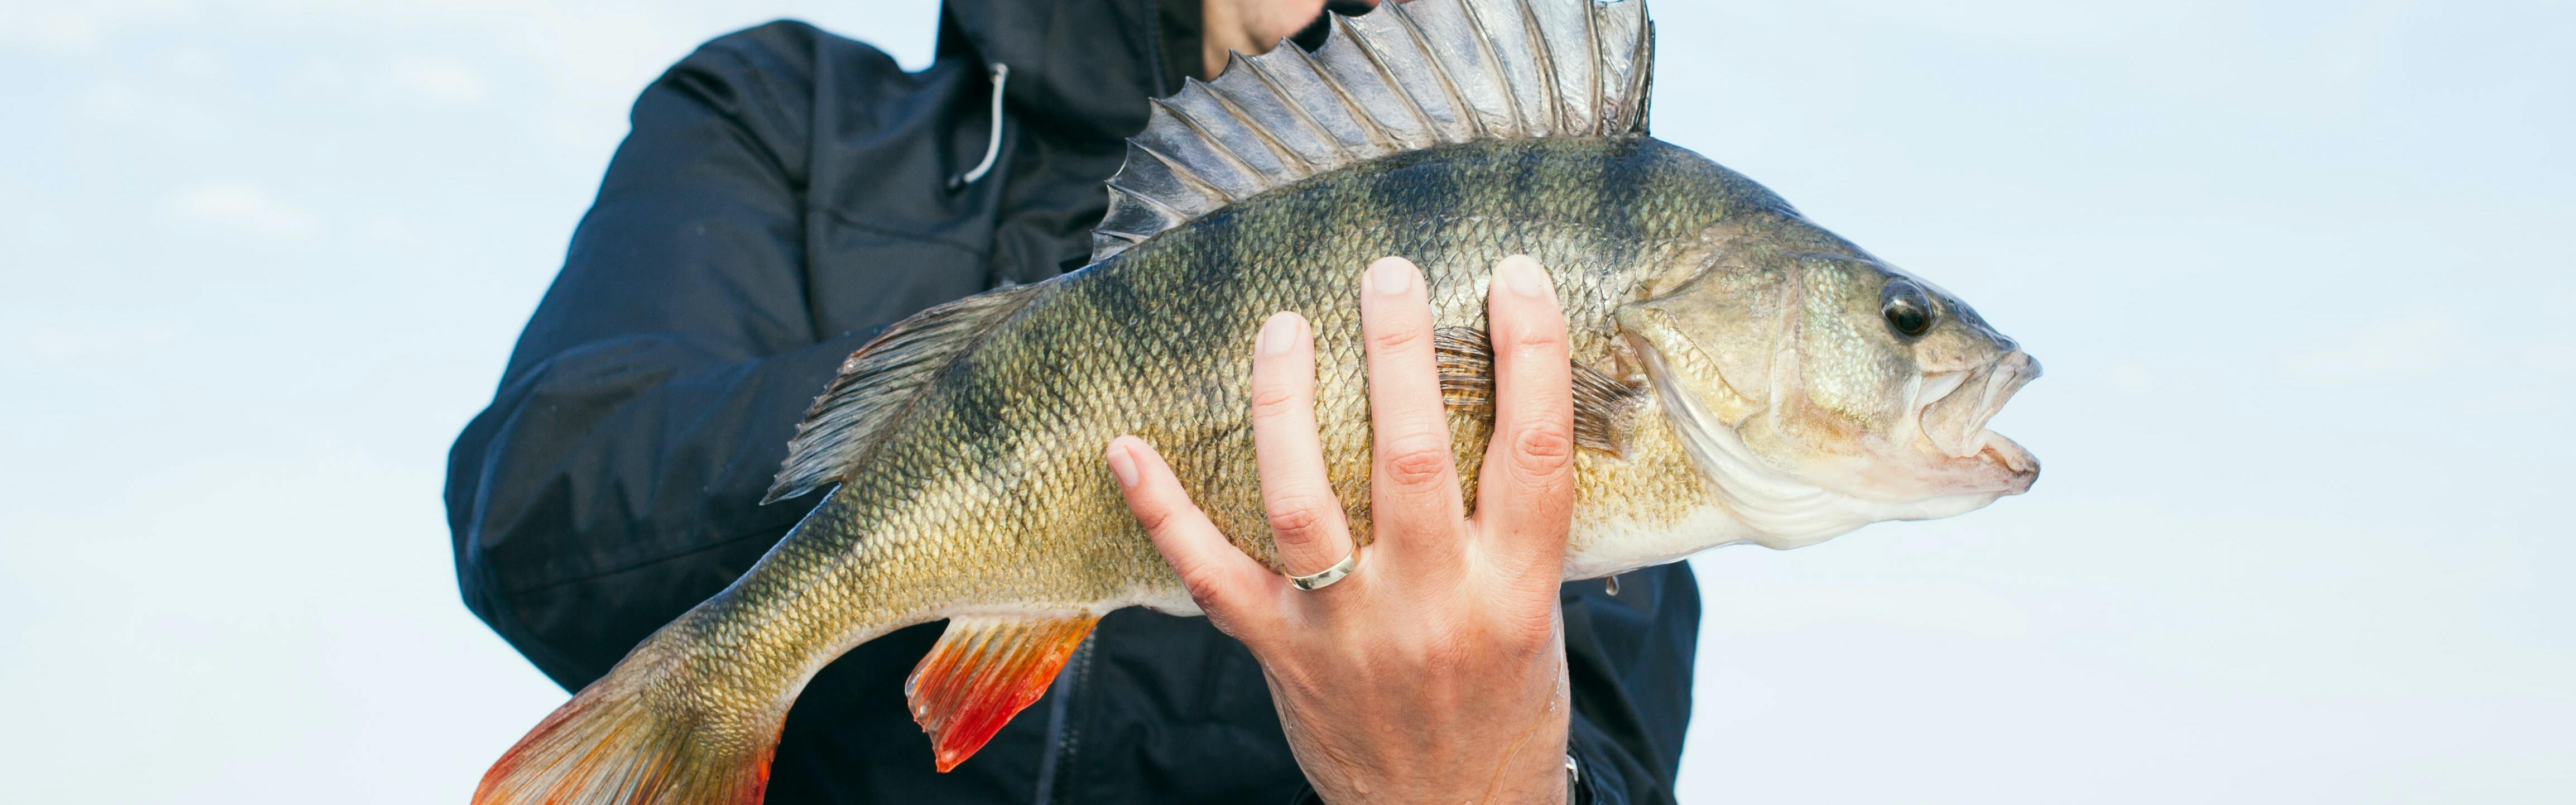 Hot List: New Baits & Rigs for Summer Walleye Fishing - Game & Fish